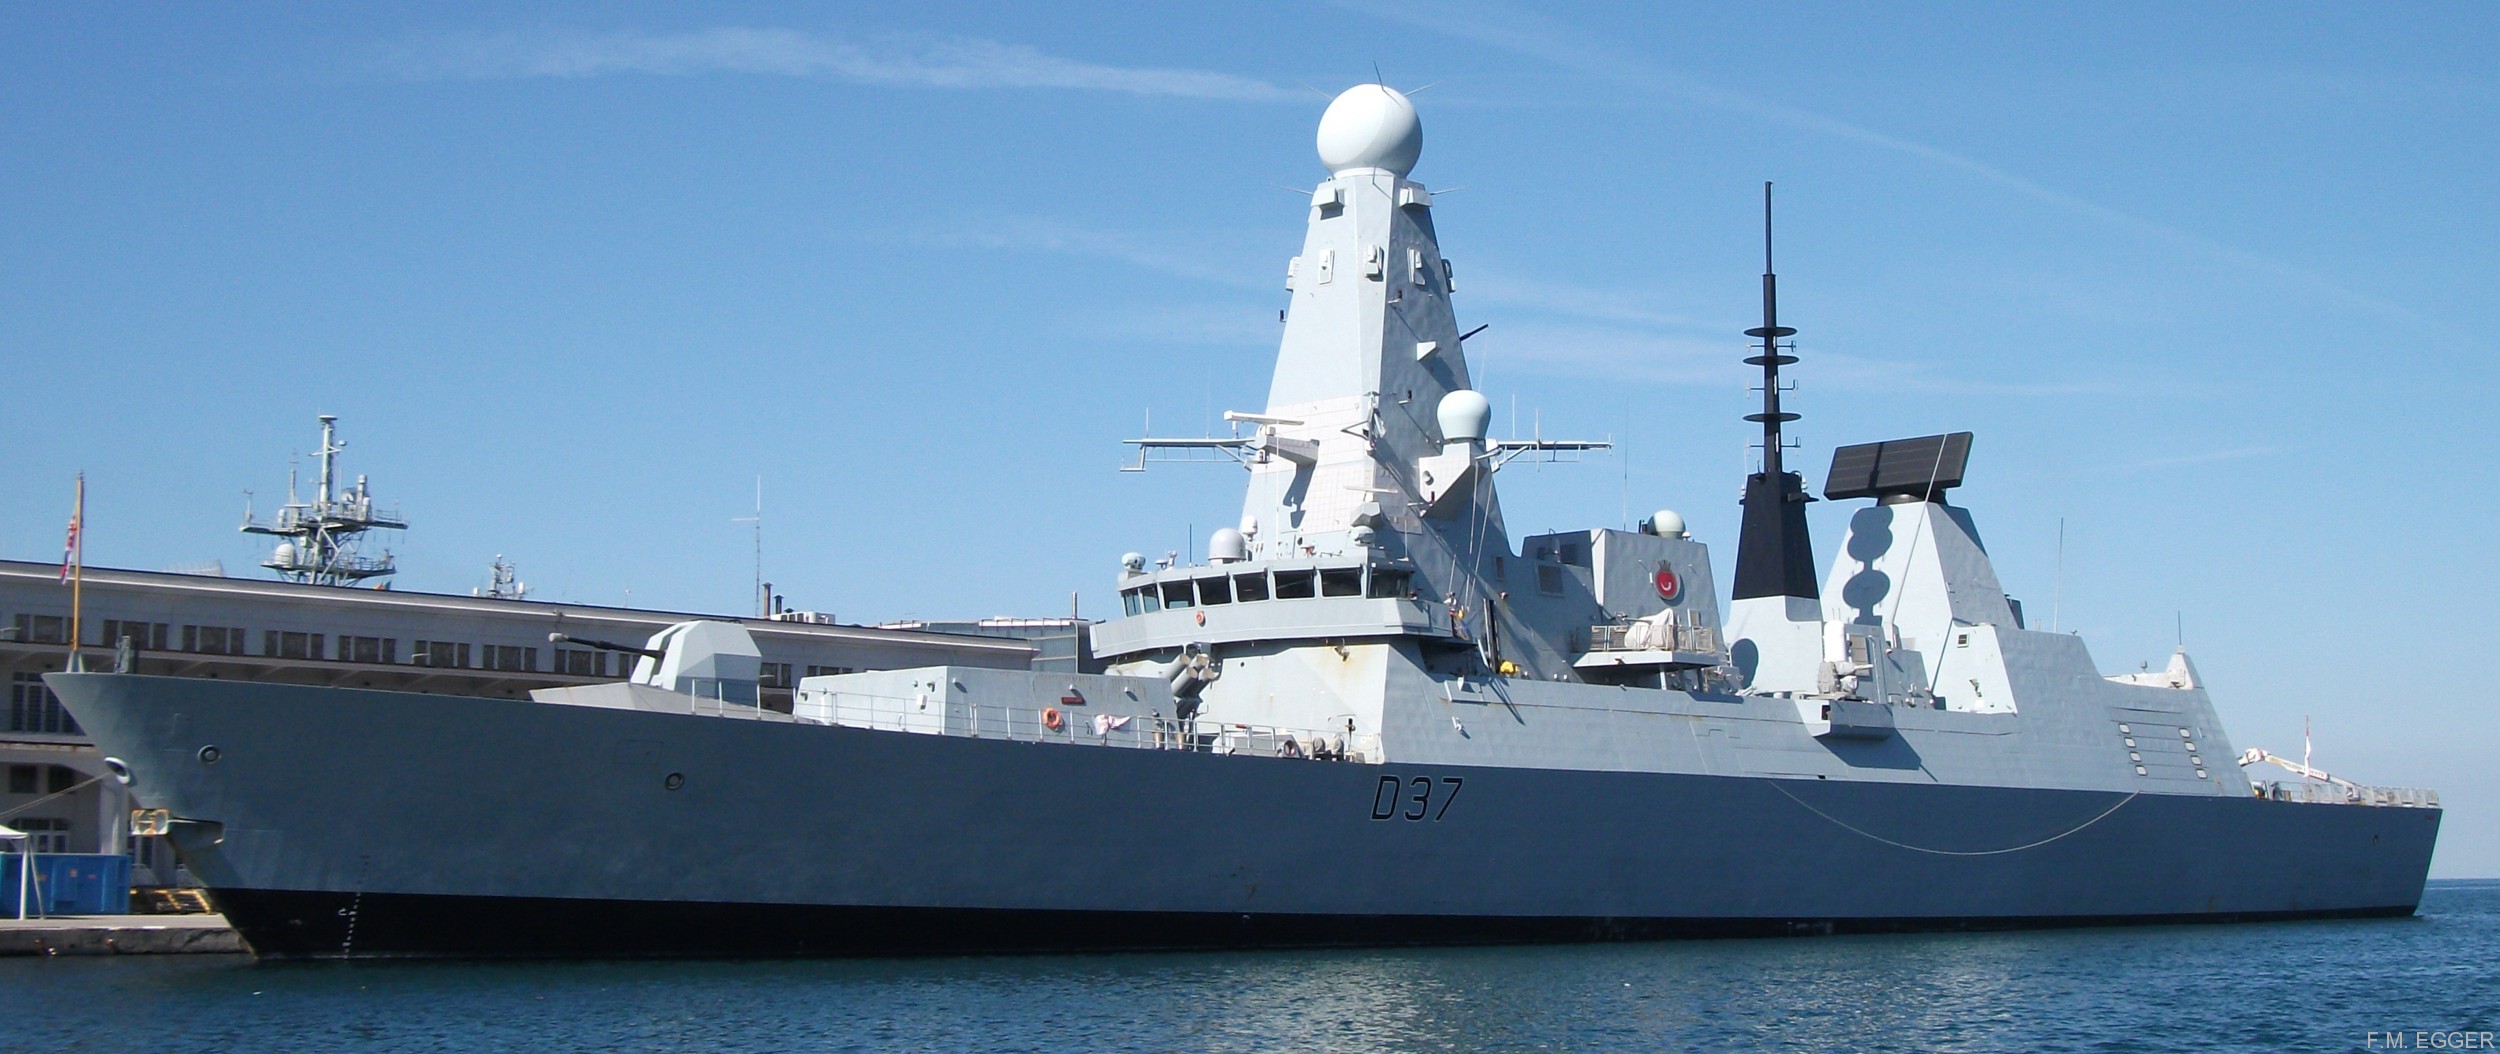 hms duncan d-37 type 45 daring class guided missile destroyer royal navy nato snmg-2 trieste 02